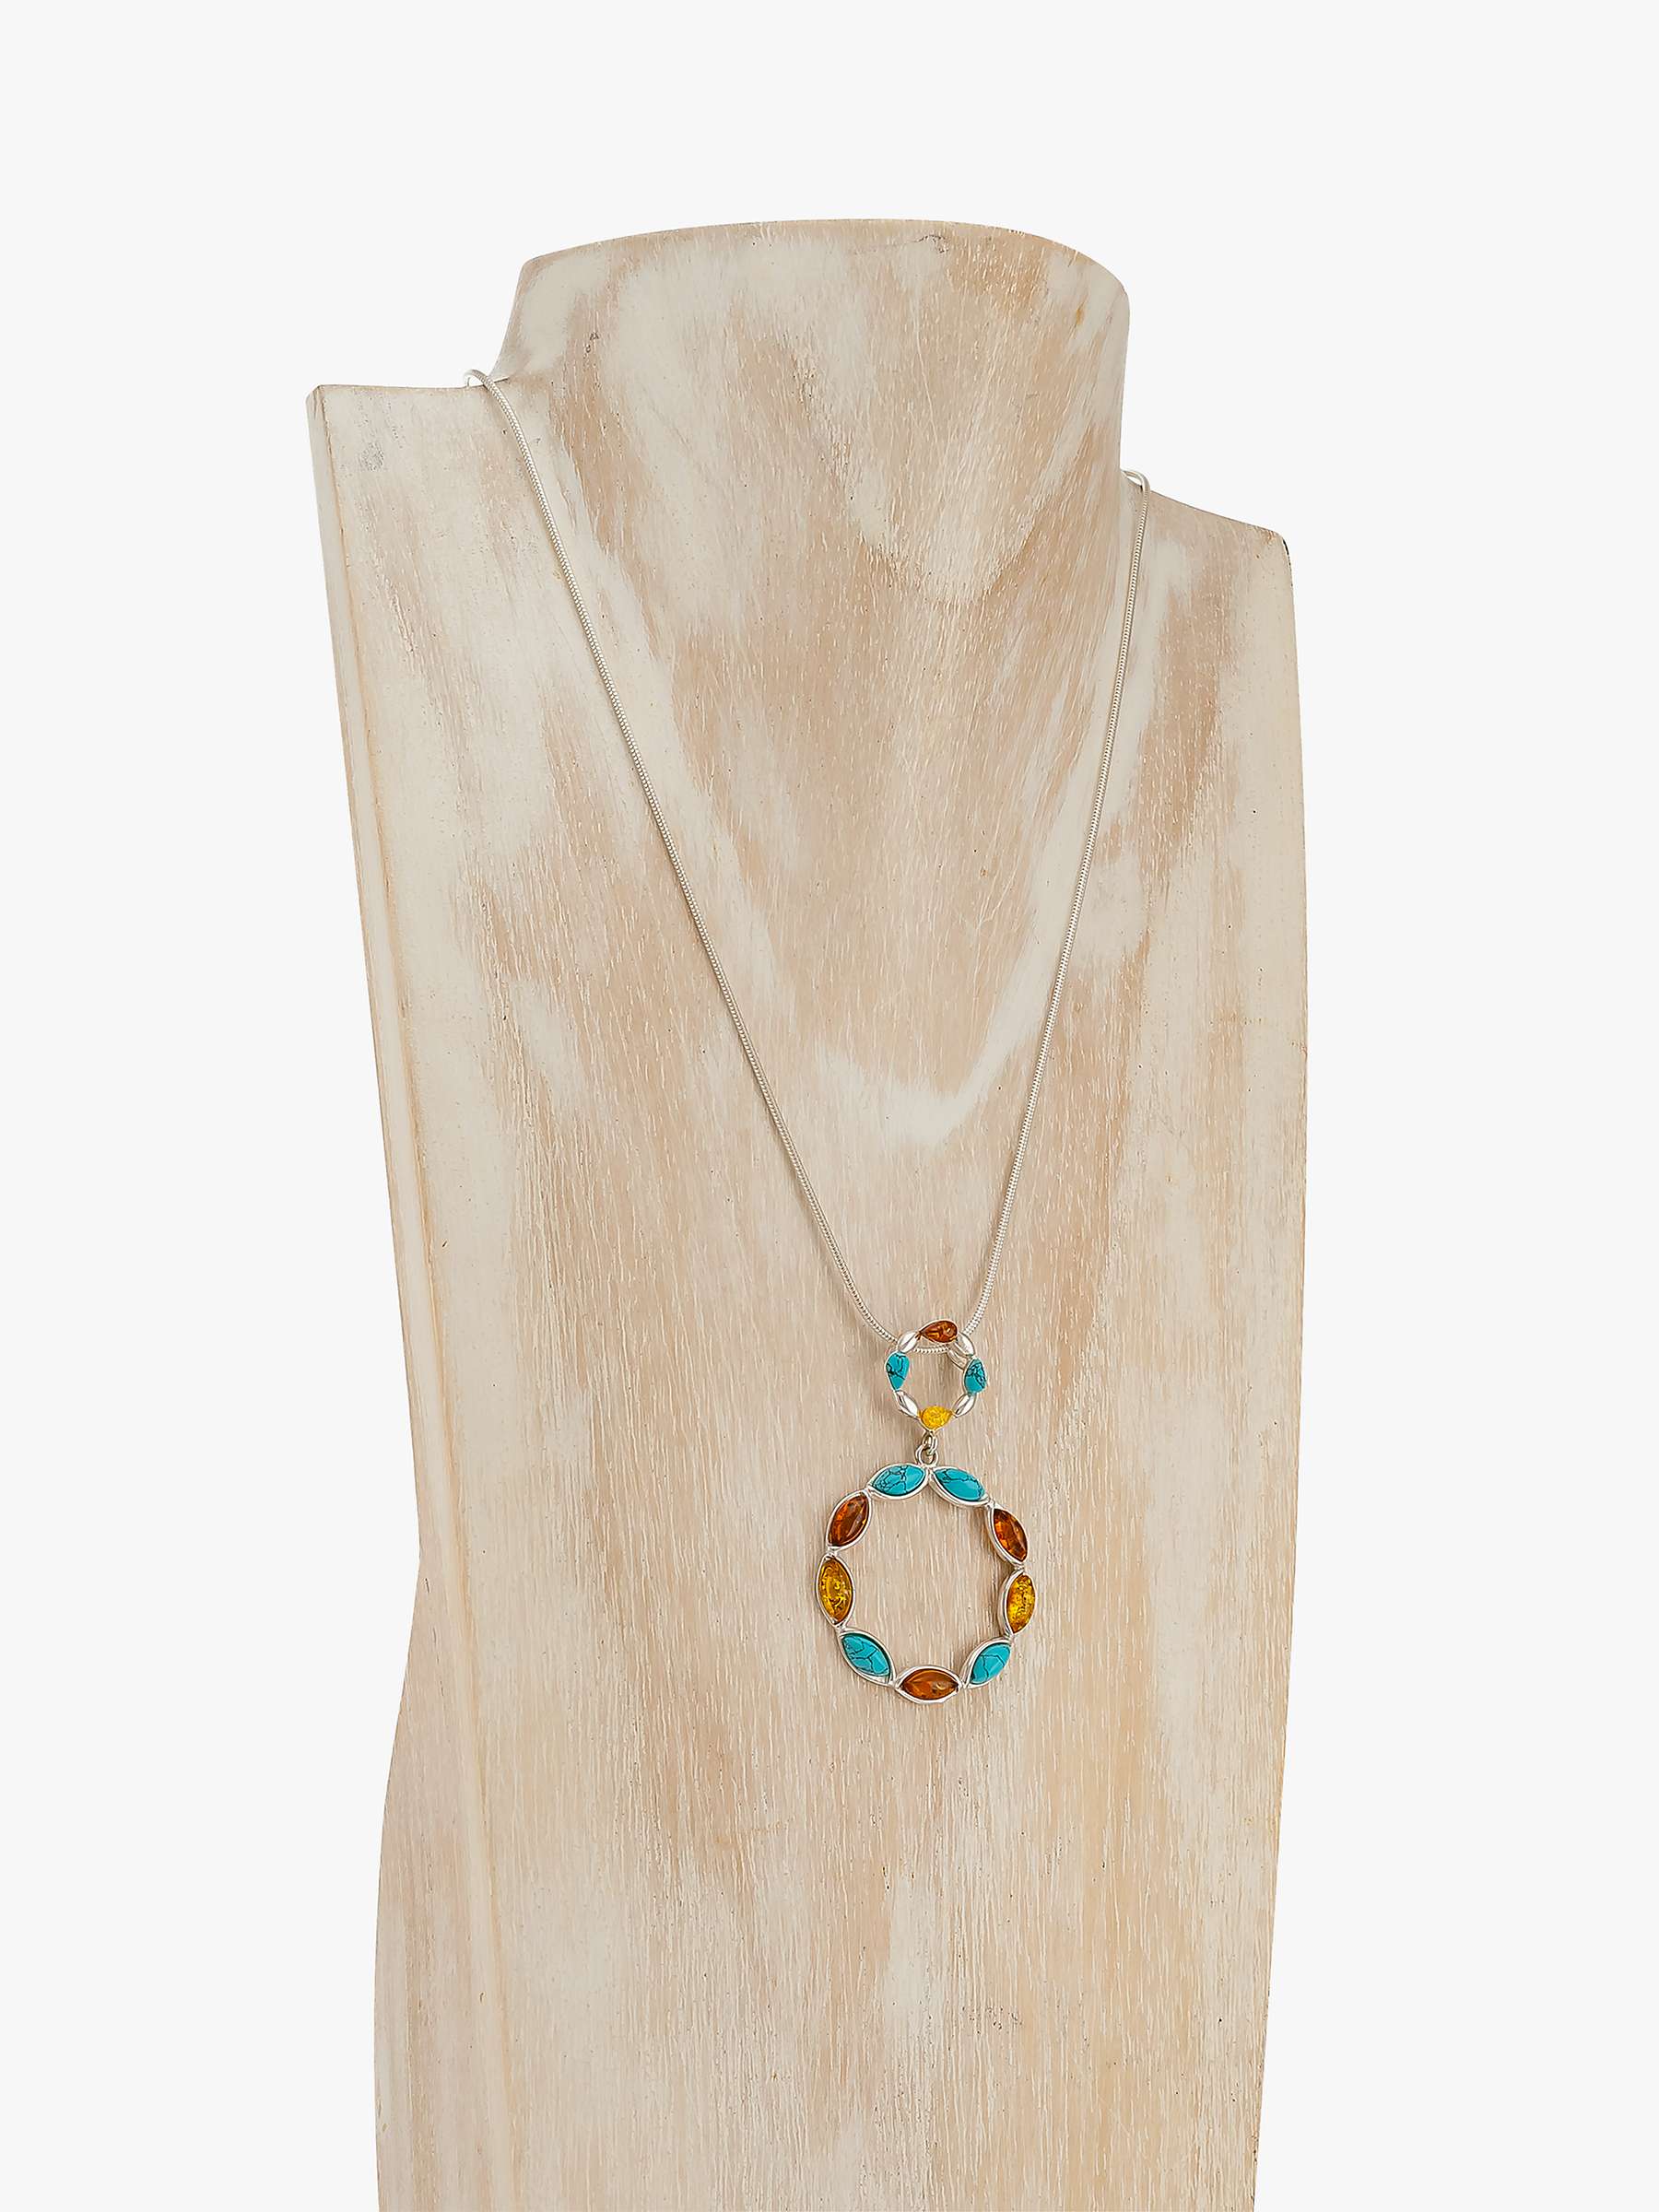 Buy Be-Jewelled Turquoise and Amber Circle Pendant Necklace, Silver/Multi Online at johnlewis.com